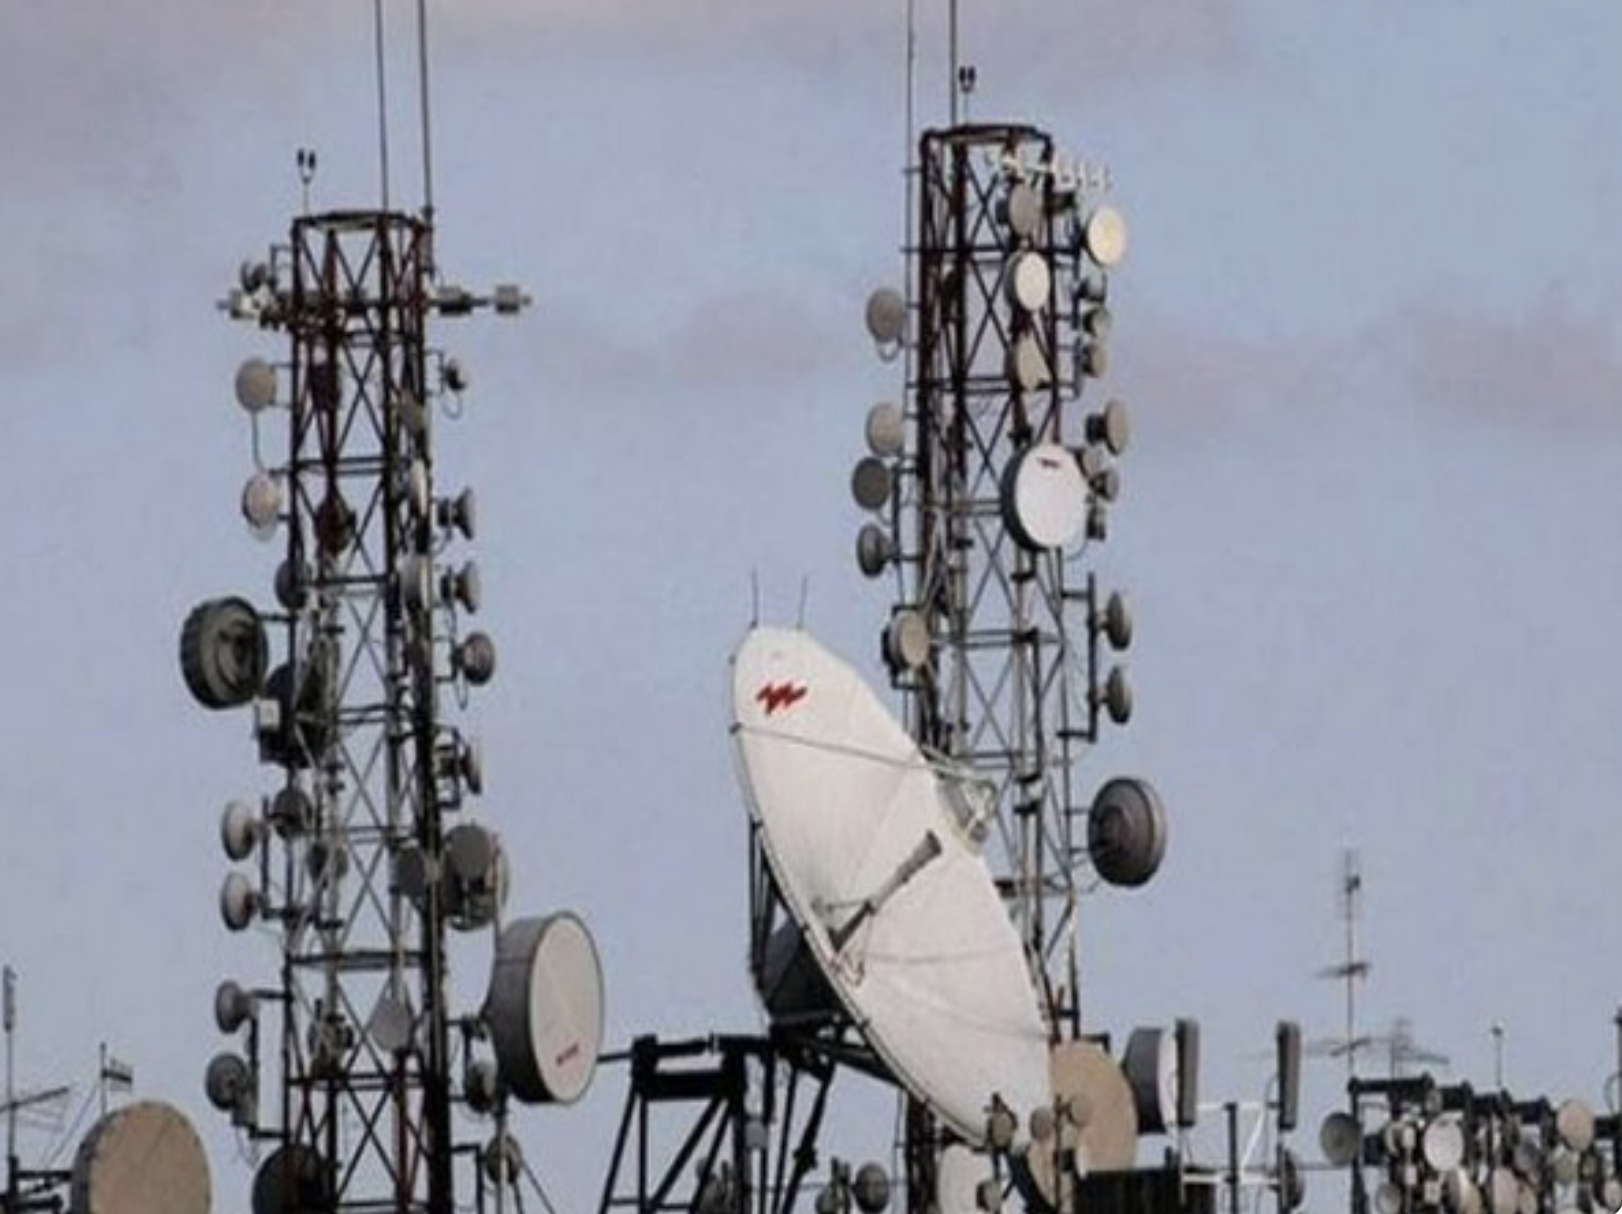 Government can take control of all telecom networks in times of emergency under new Telecom Act